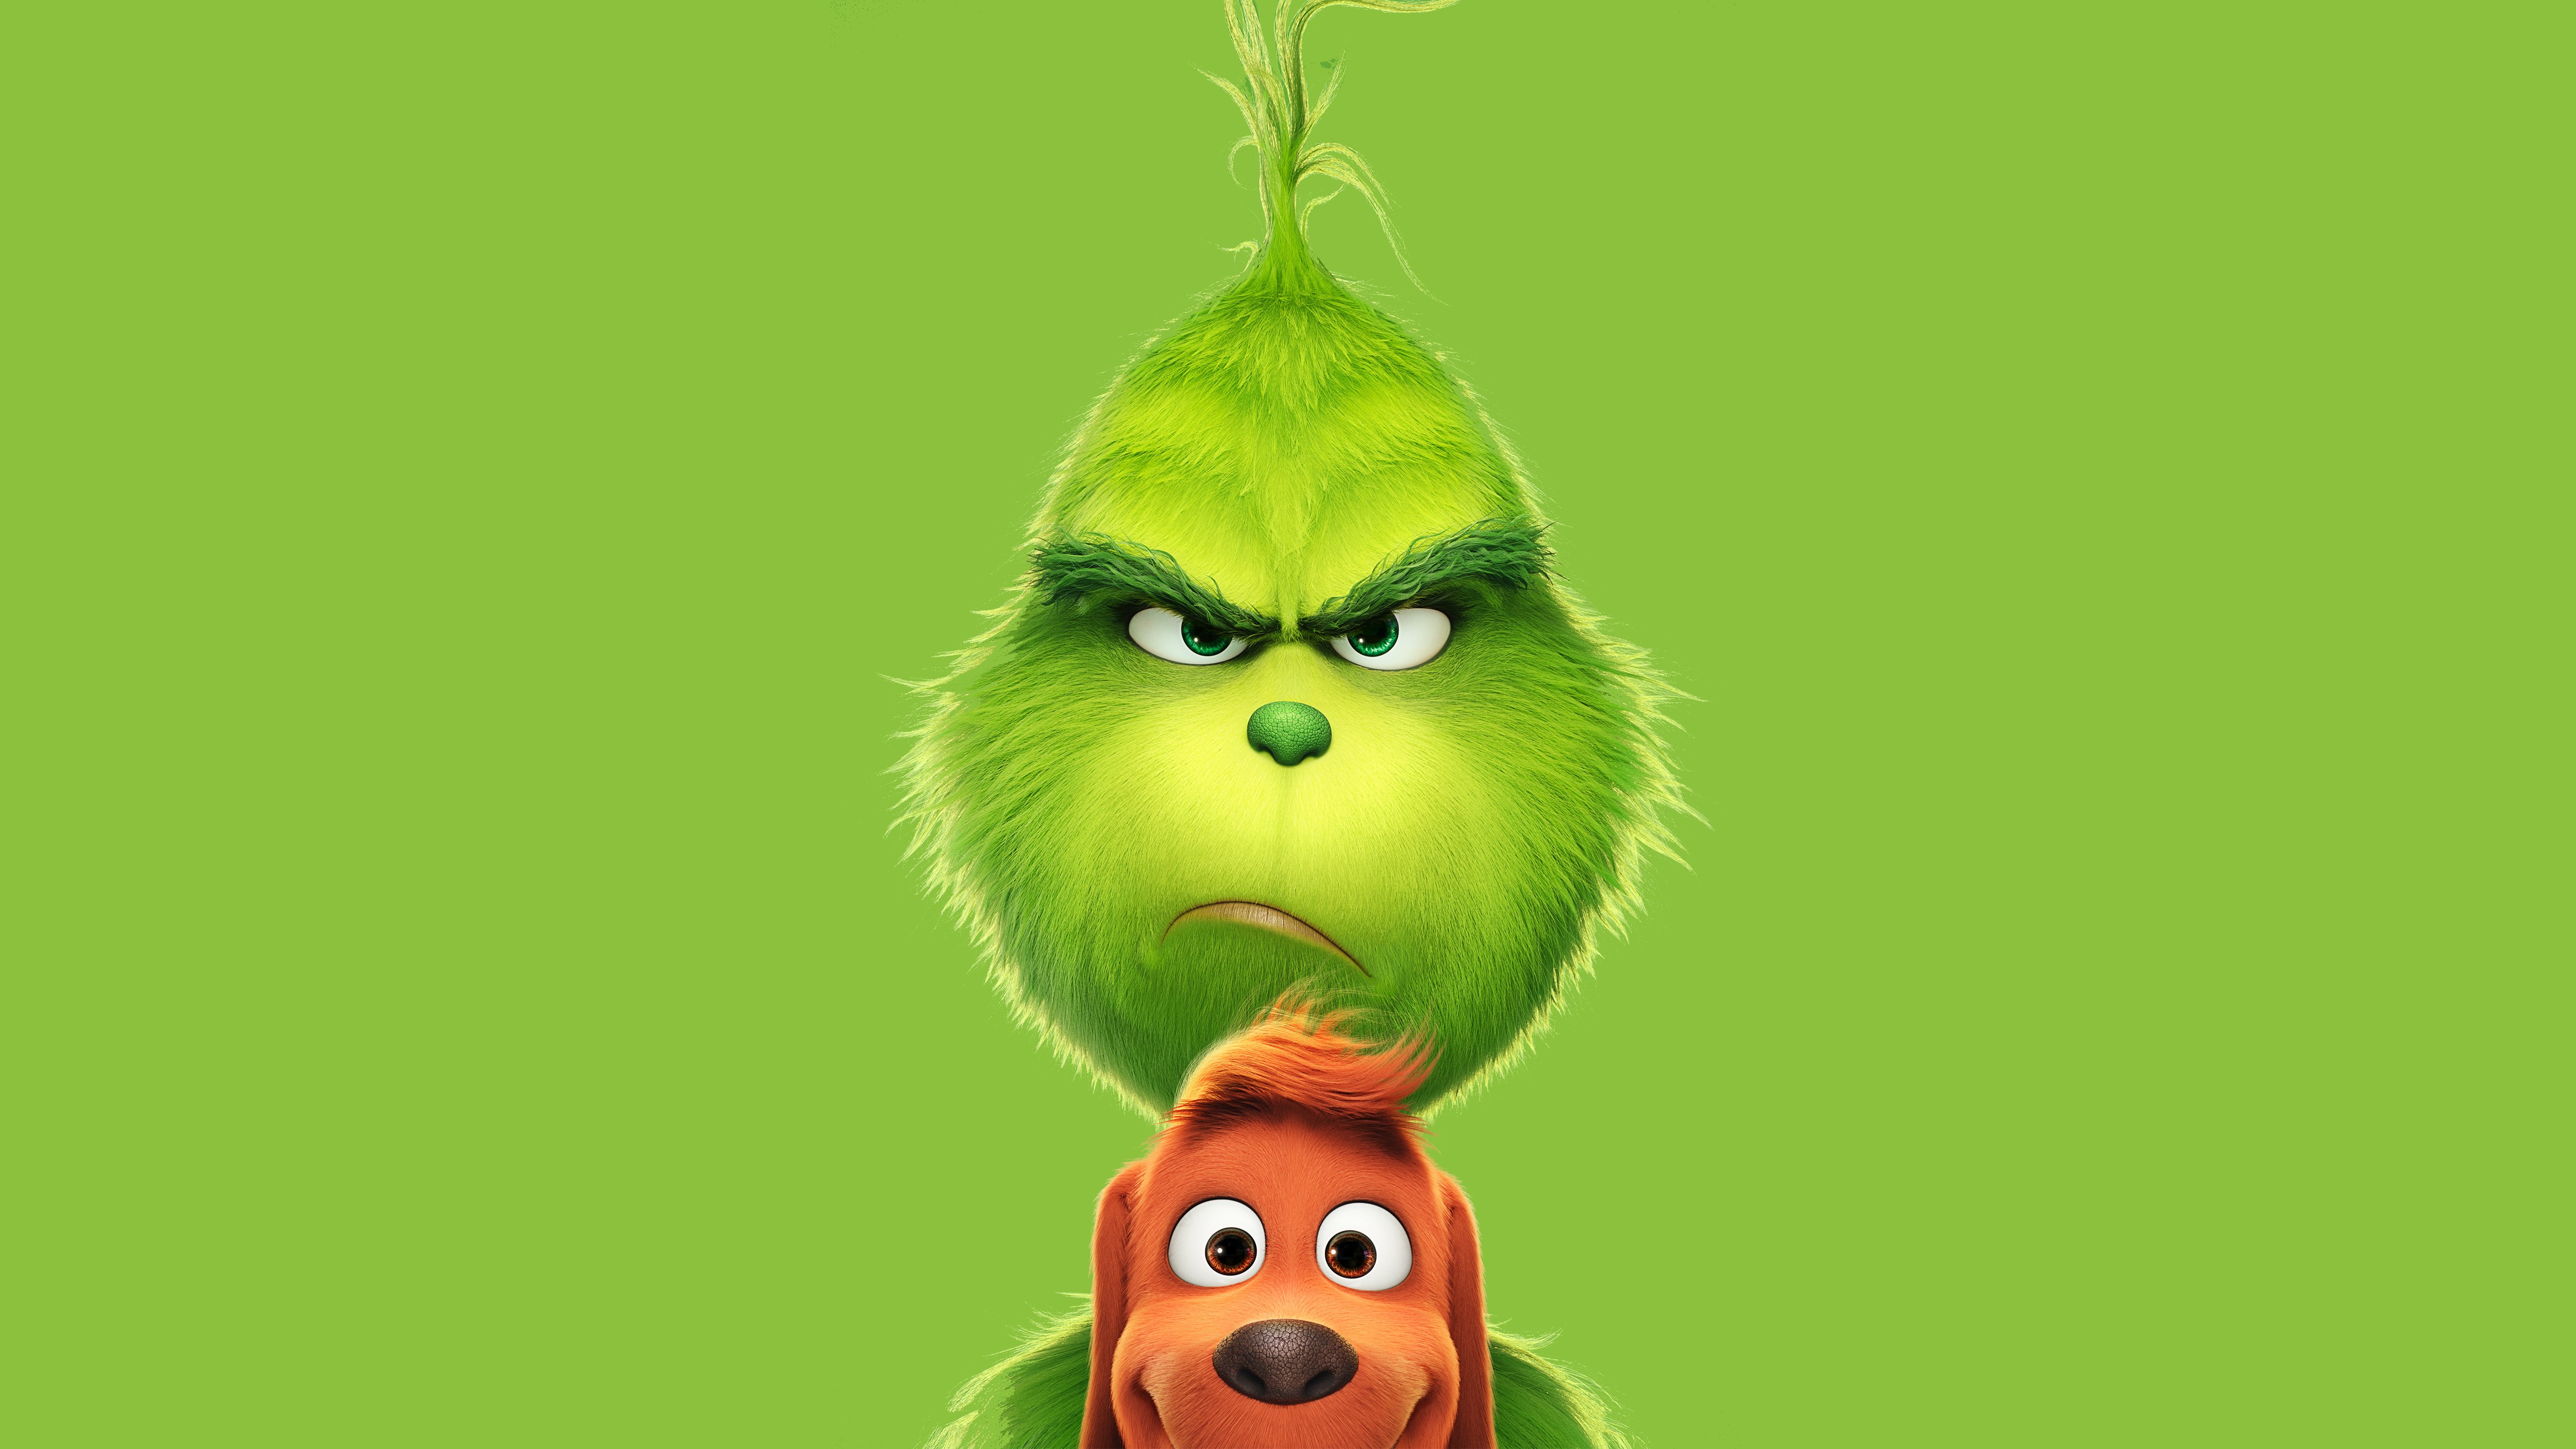 The Grinch Movie Animated film Wallpaper 5k Ultra HD